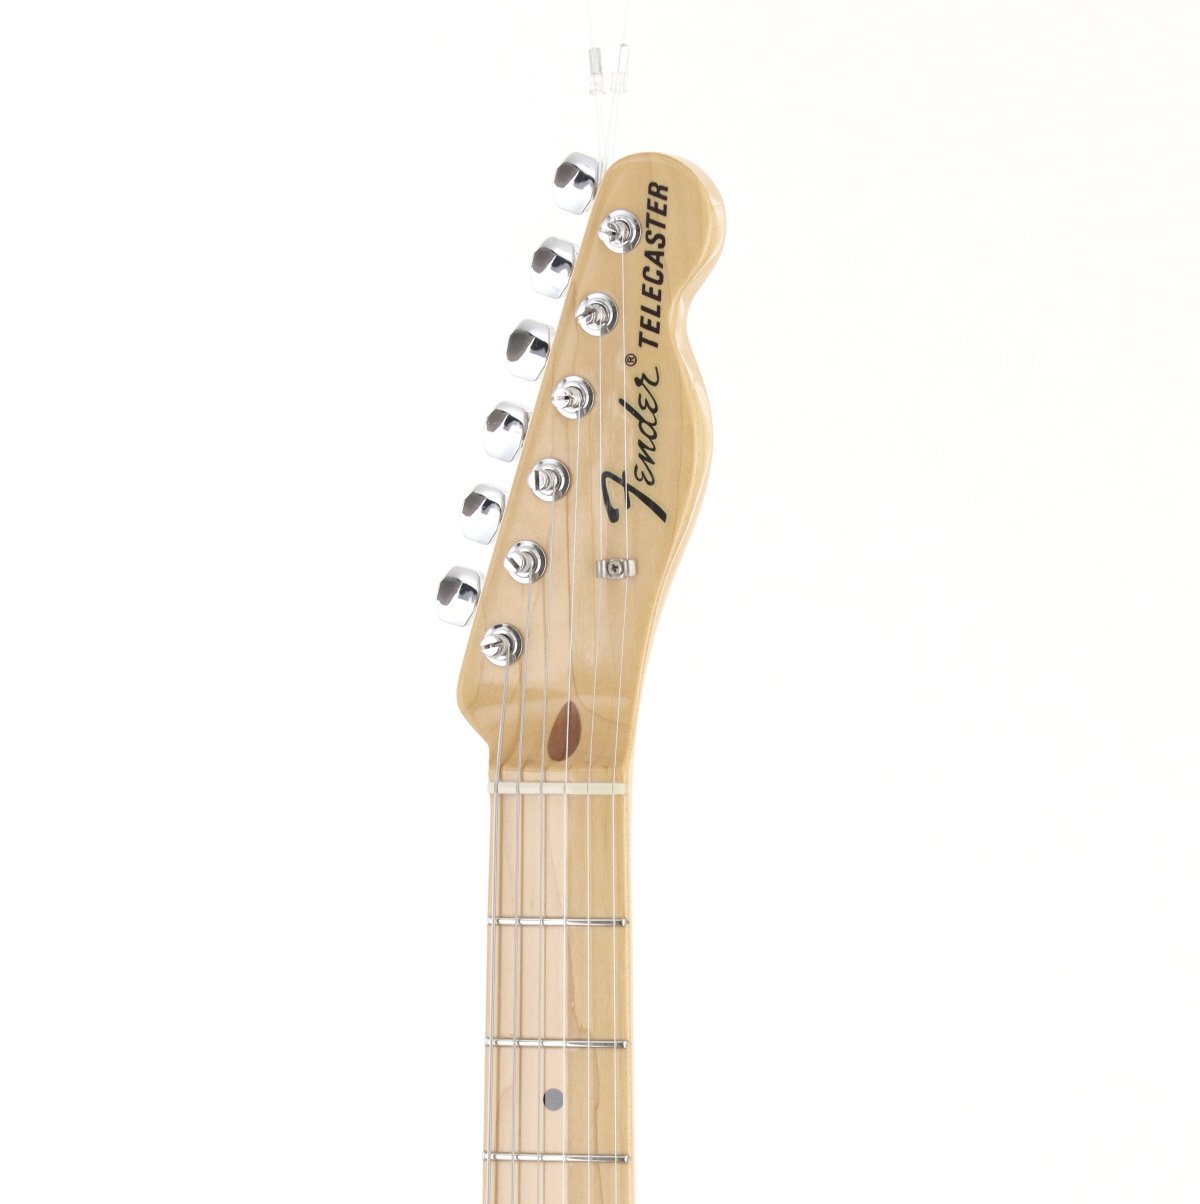 [SN MZ8267986] USED Fender Mexico / Classic Series 69 Telecaster Thinline Natural [03]